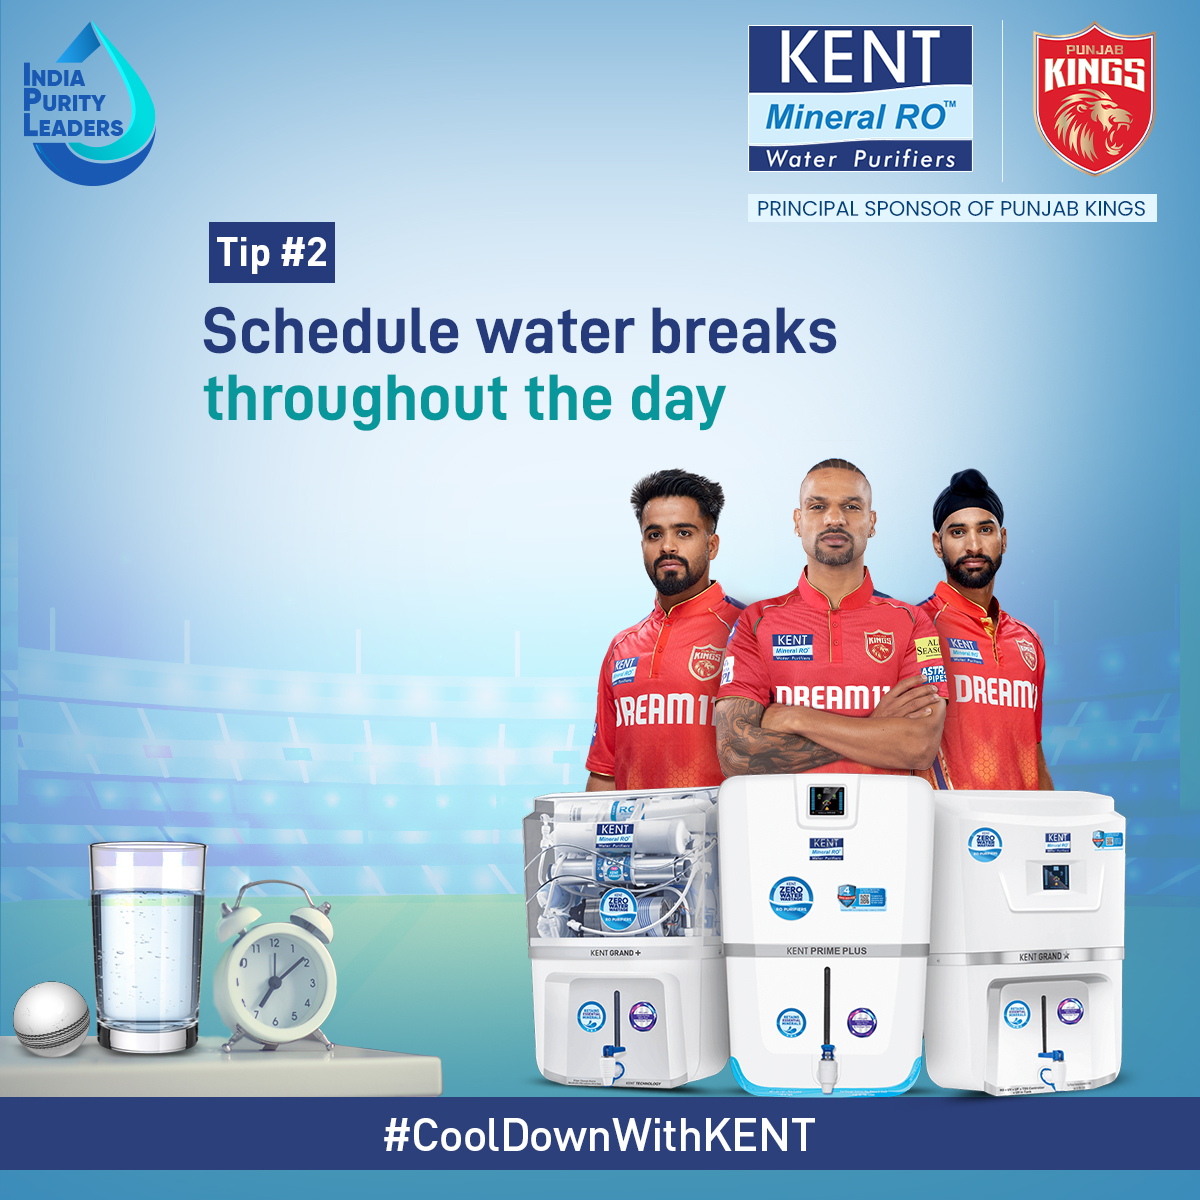 #CoolDownWithKENT​
​
If you miss drinking optimum water throughout your day, this can help you.​
​
Use timers to schedule water breaks and stay hydrated all day long.​

#KENTRO #SabseShudhPaani #SummerTips #BeatTheHeat #WaterFilter #PureWater #WaterPurifier #MineralWater